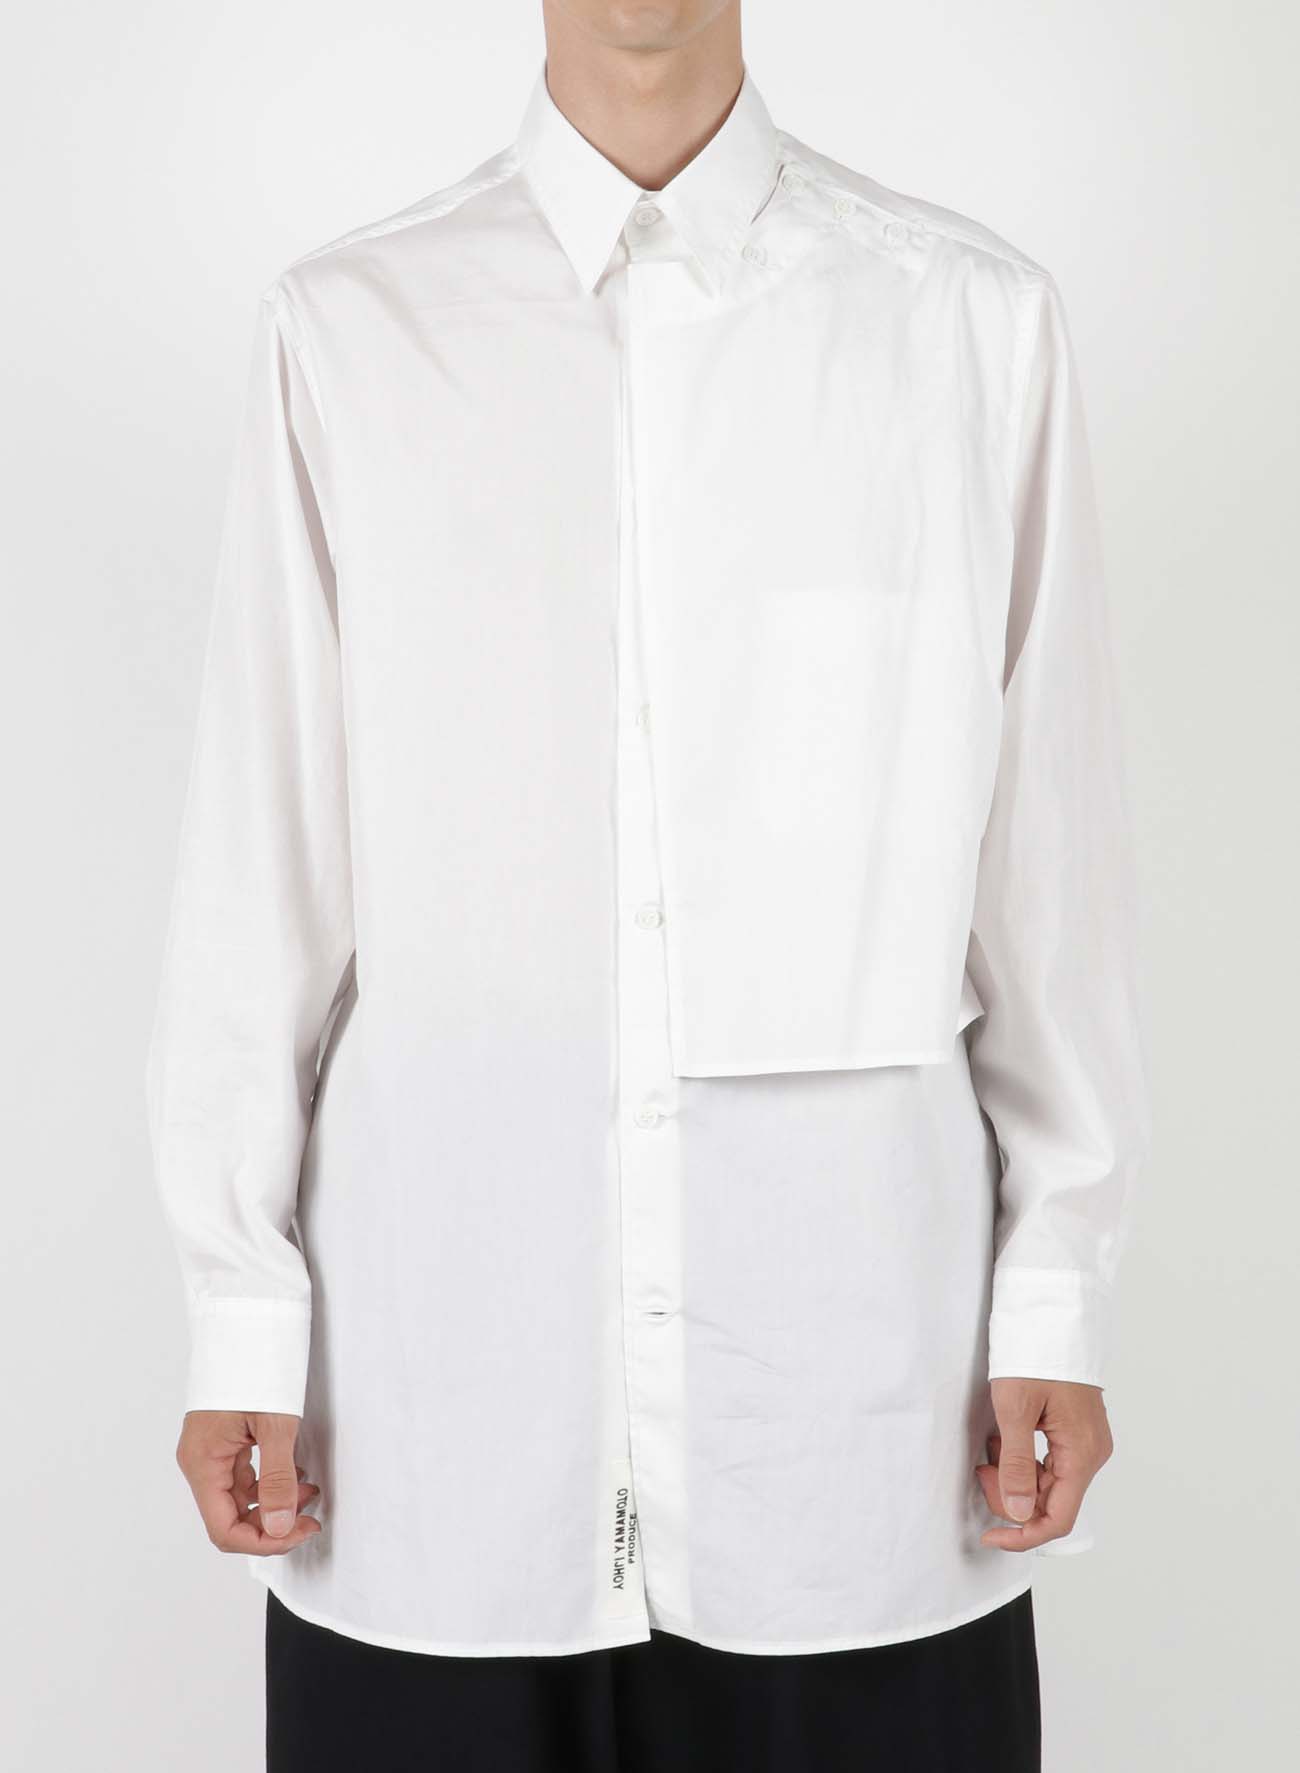 CHAIN STITCH BROAD LEFT FRONT DOUBLE BLOUSE